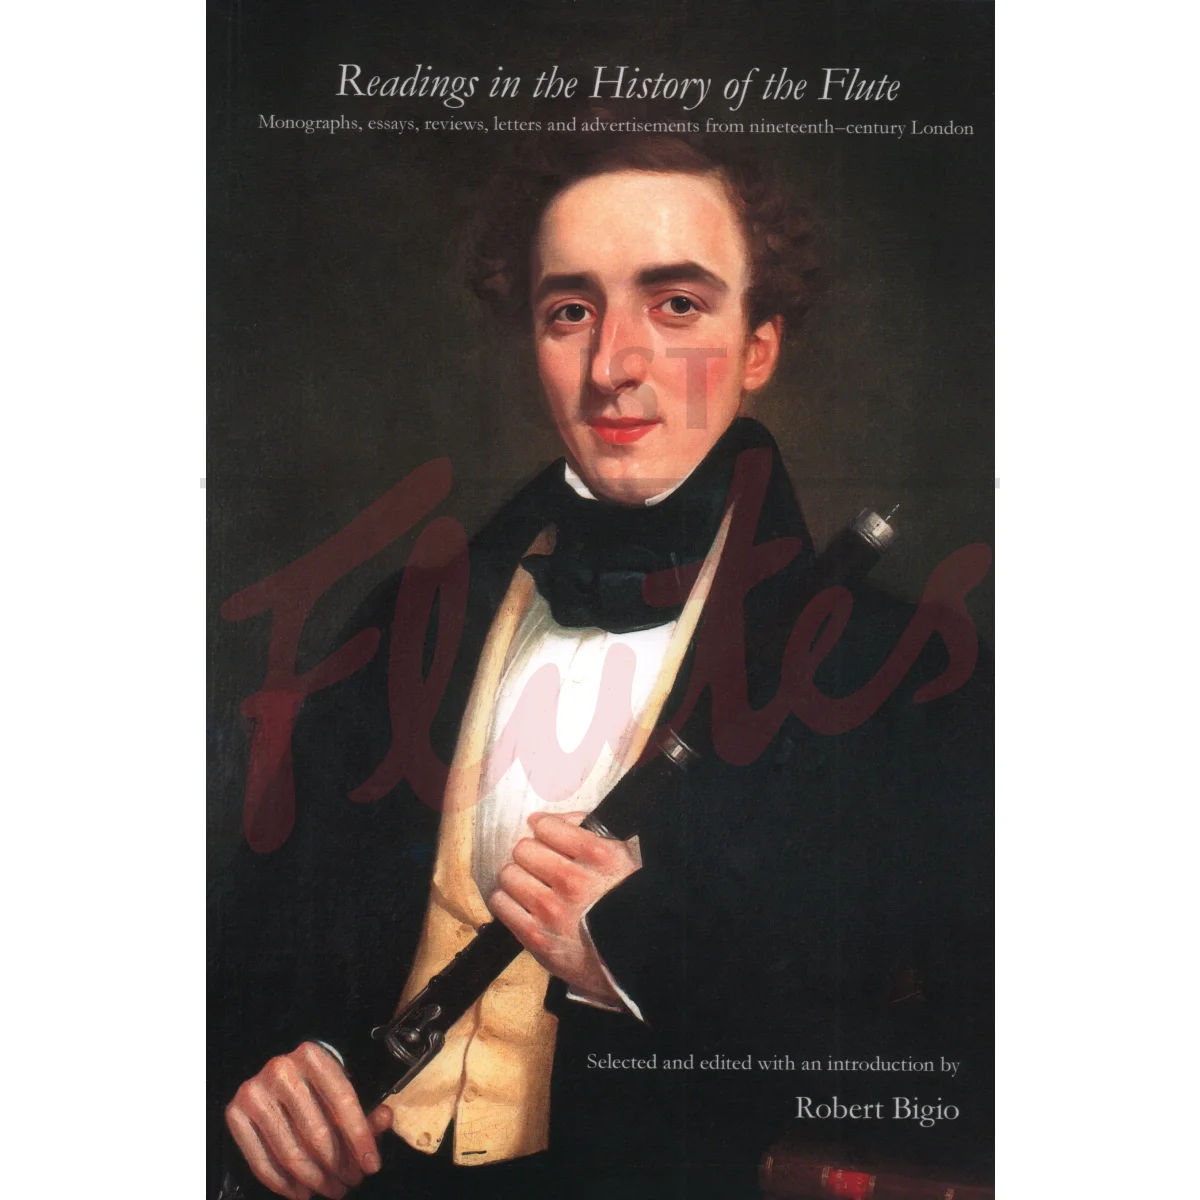 Readings in the History of the Flute